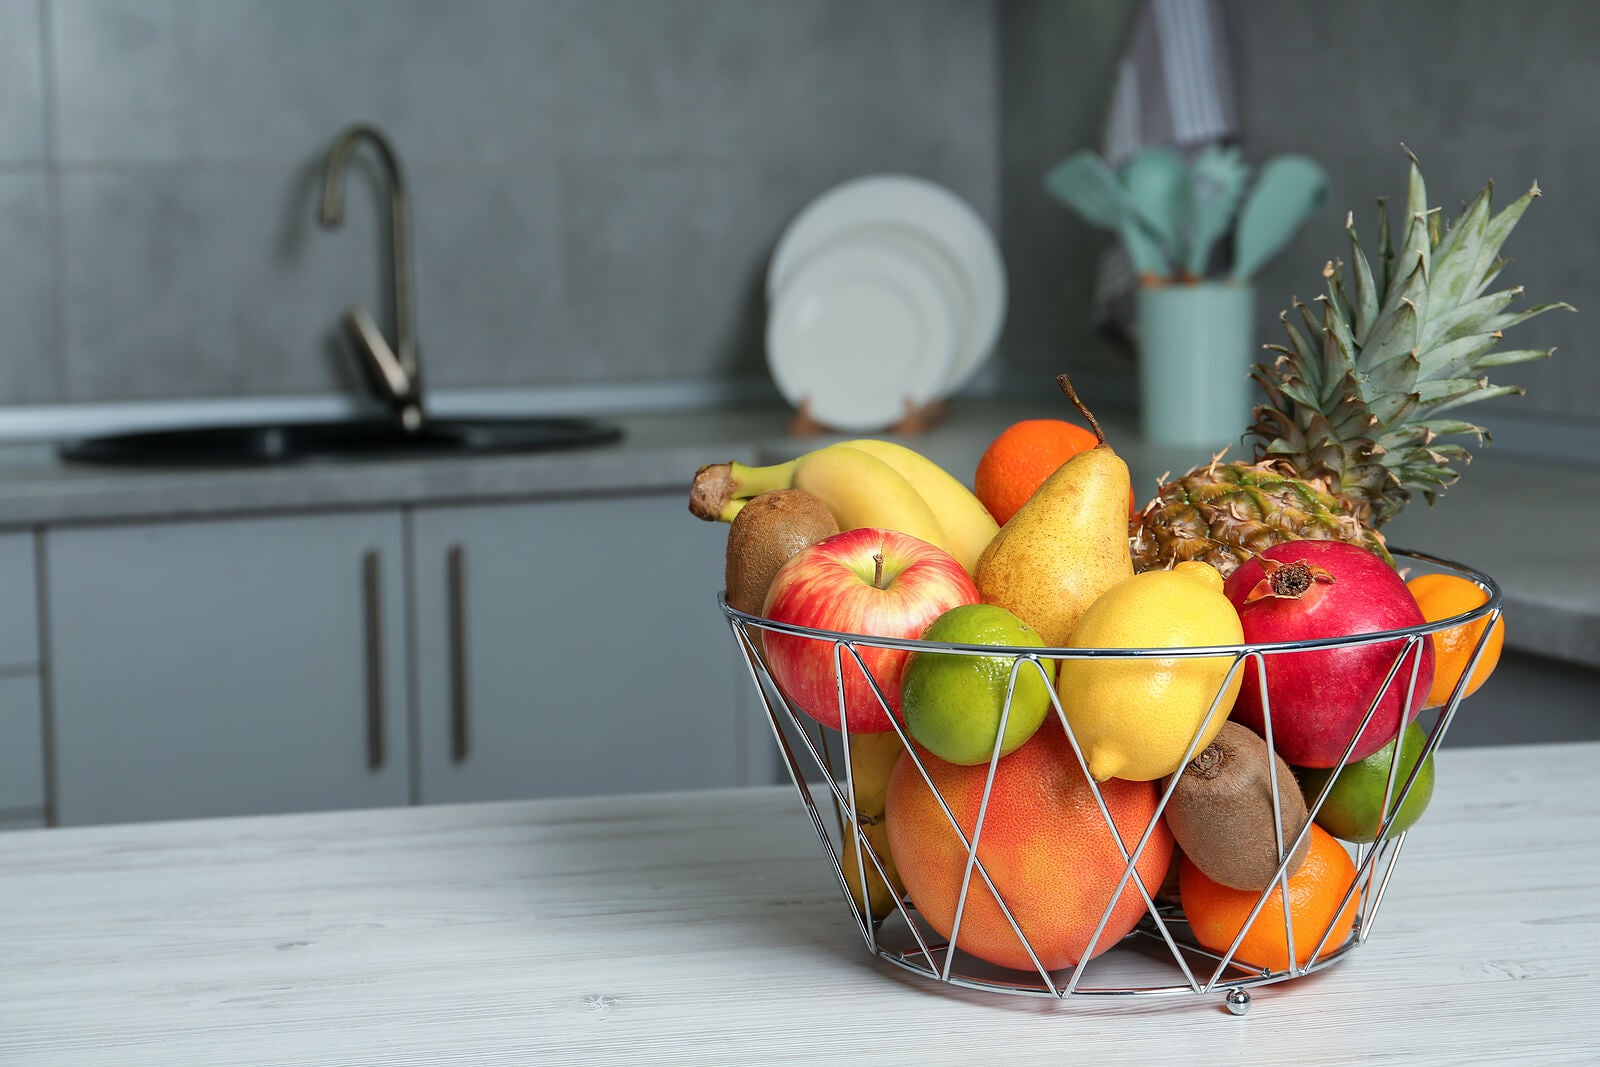 Decorate your kitchen in the summer